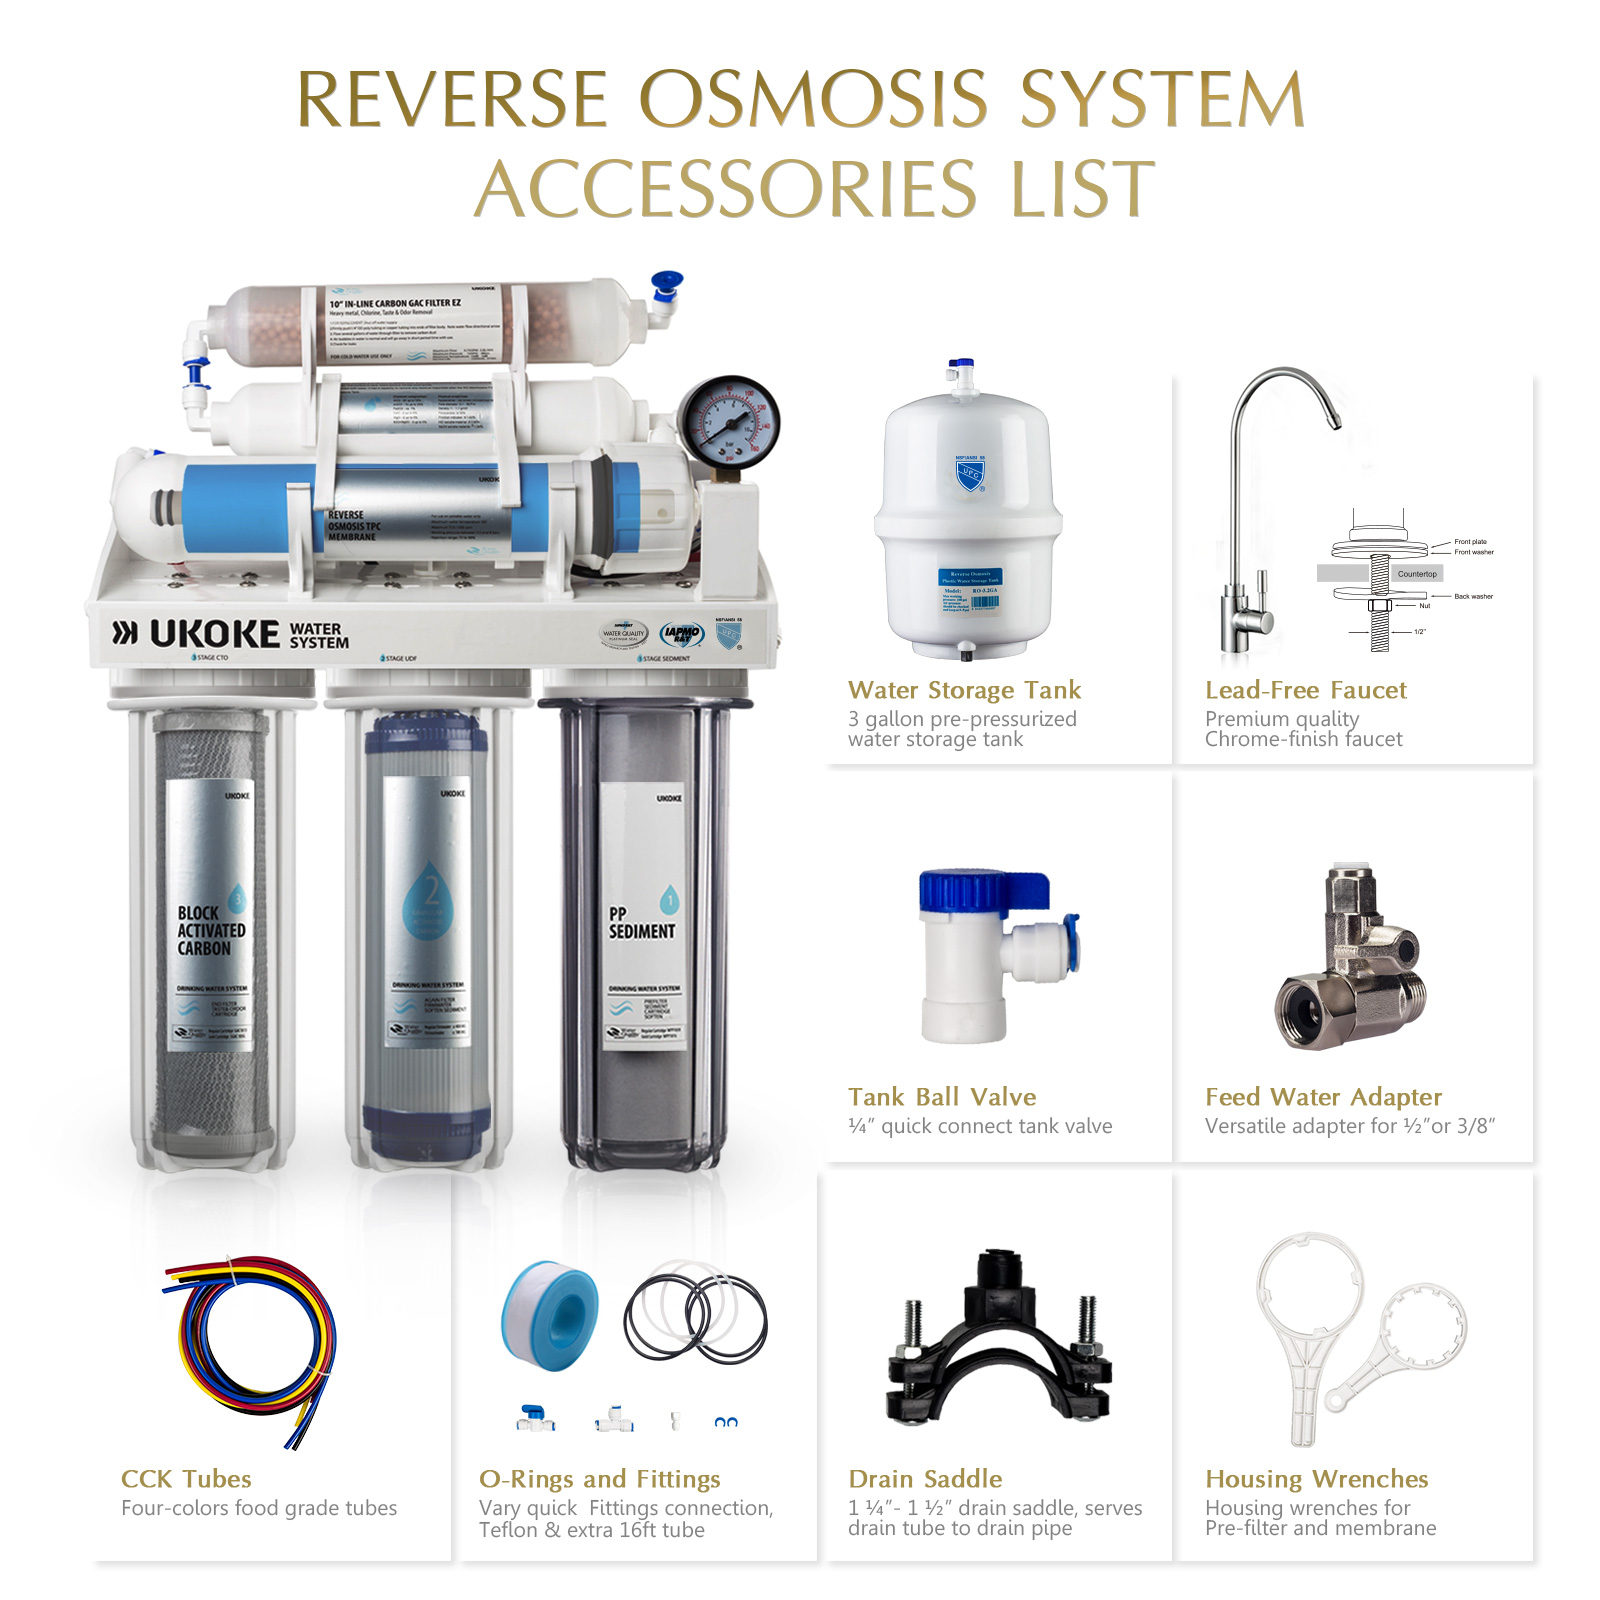 Ukoke 6 Stages Reverse Osmosis, Water Filtration System, 75 GPD - image 4 of 10